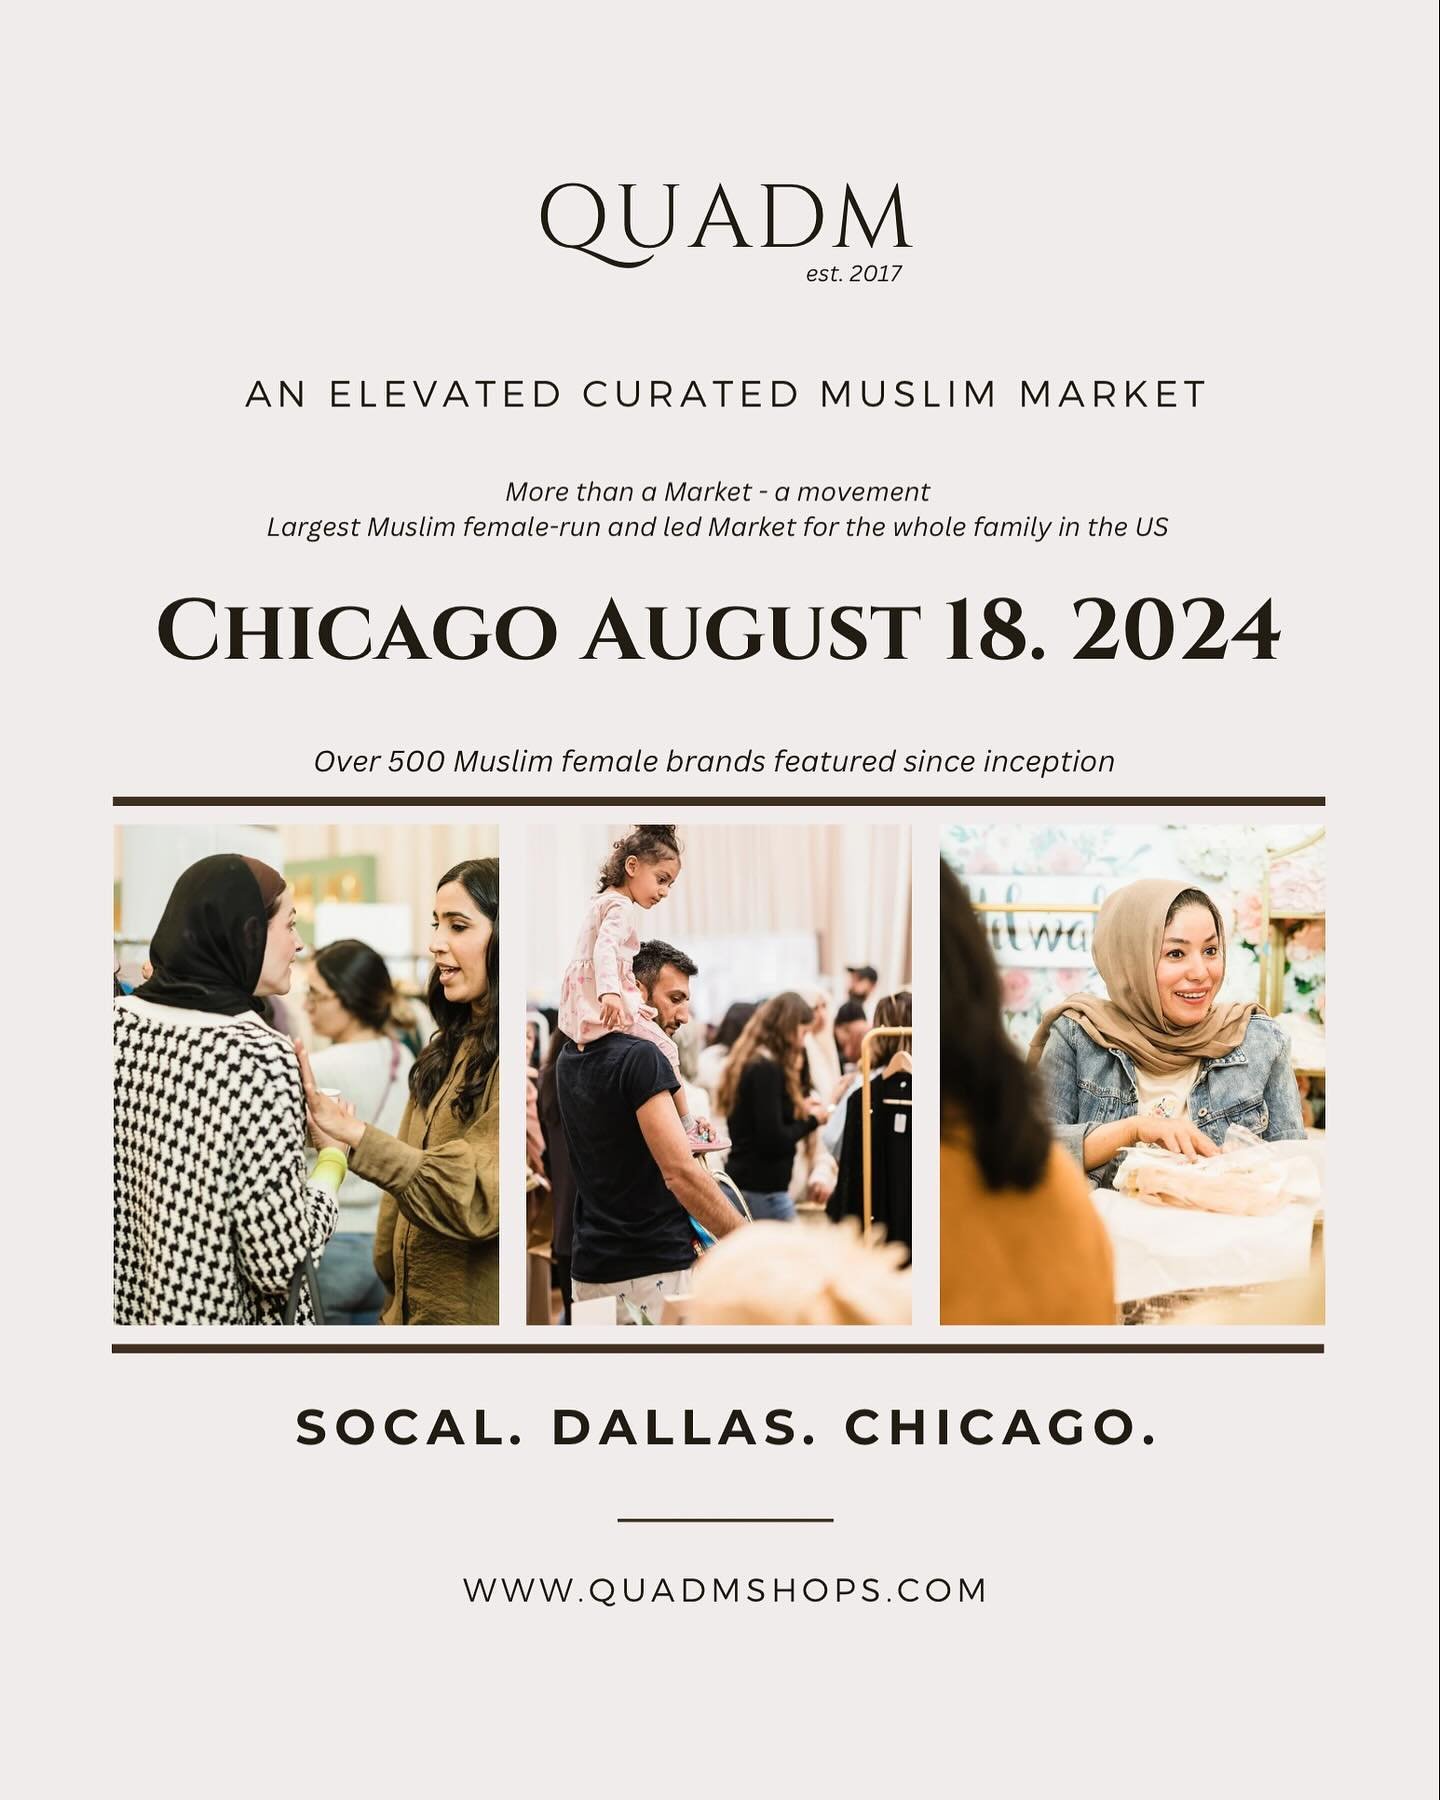 QUADM CHICAGO- August 18.2024

Working on bringing an elevated, curated, women led, women run market to Chicago. Conveniently located, making this a Midwest market, we&rsquo;re hoping it becomes accessible to surrounding states! 

Tag your favorite f